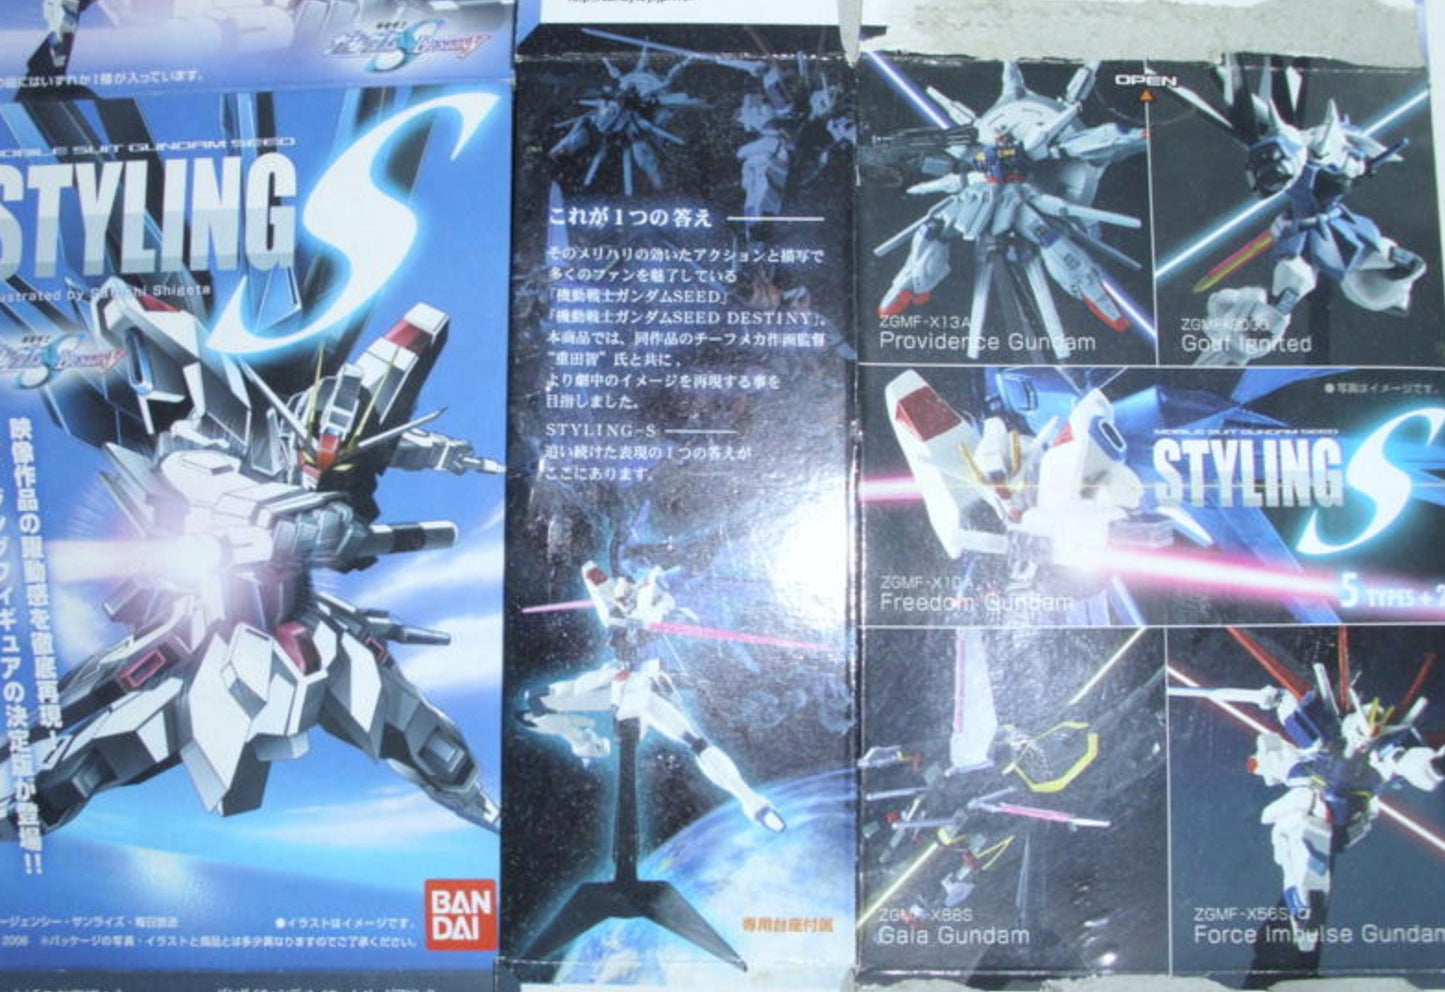 Bandai Mobile Suit Gundam Seed S Styling 5 Trading Collection Figure Set